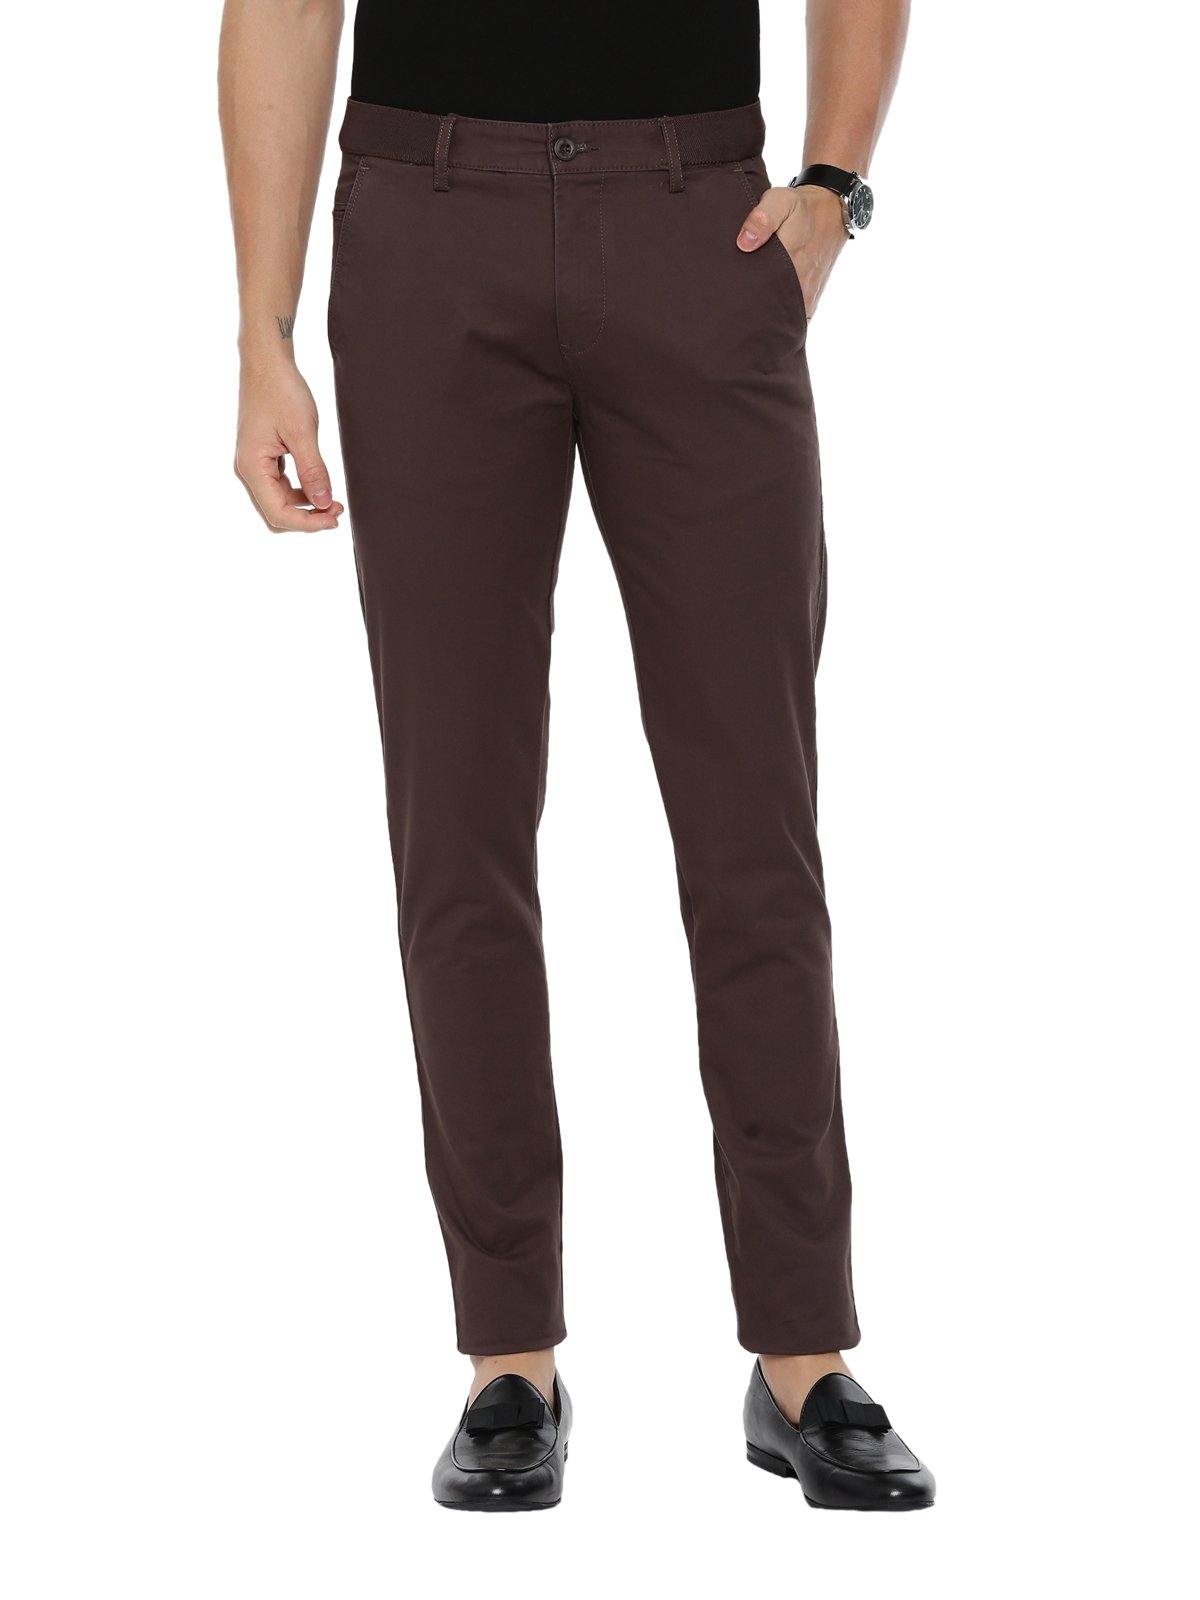 Straight Leg Mid Rise Brown Leather Trousers Pant for Men